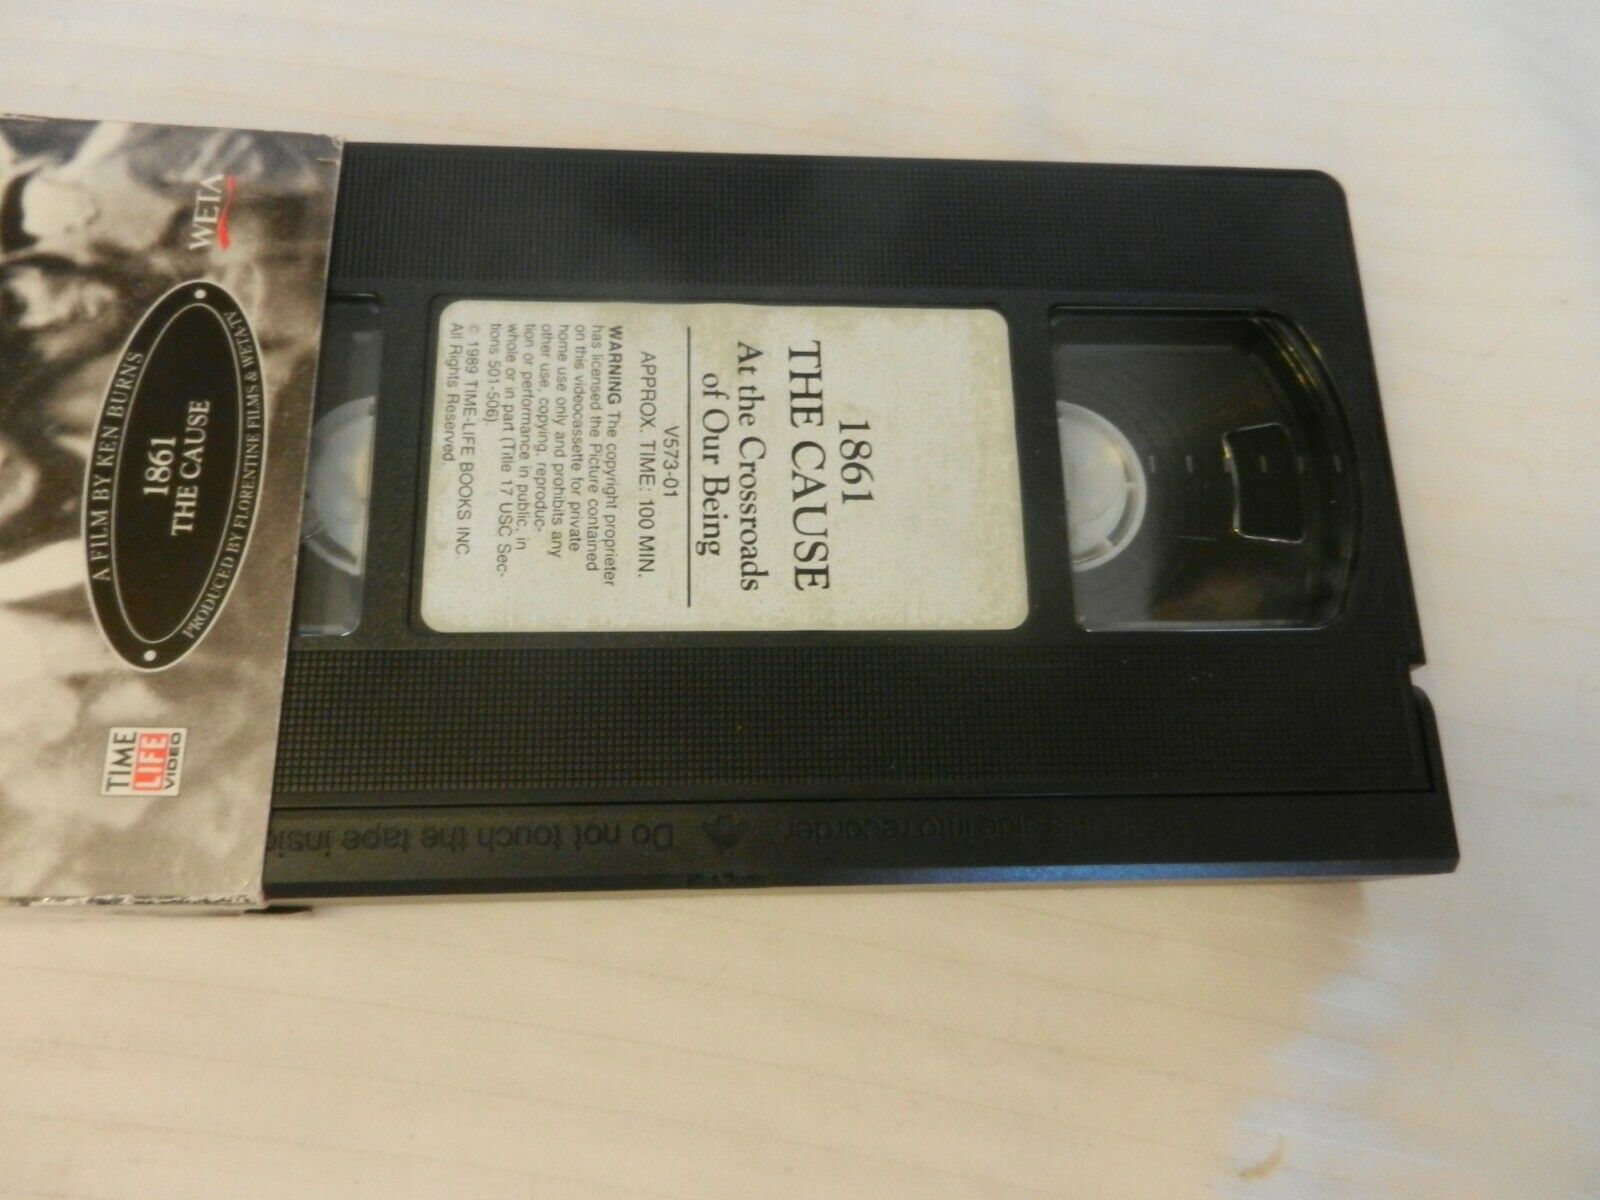 The Civil War Episode 1 (VHS) The Cause by Ken Burns - VHS Tapes